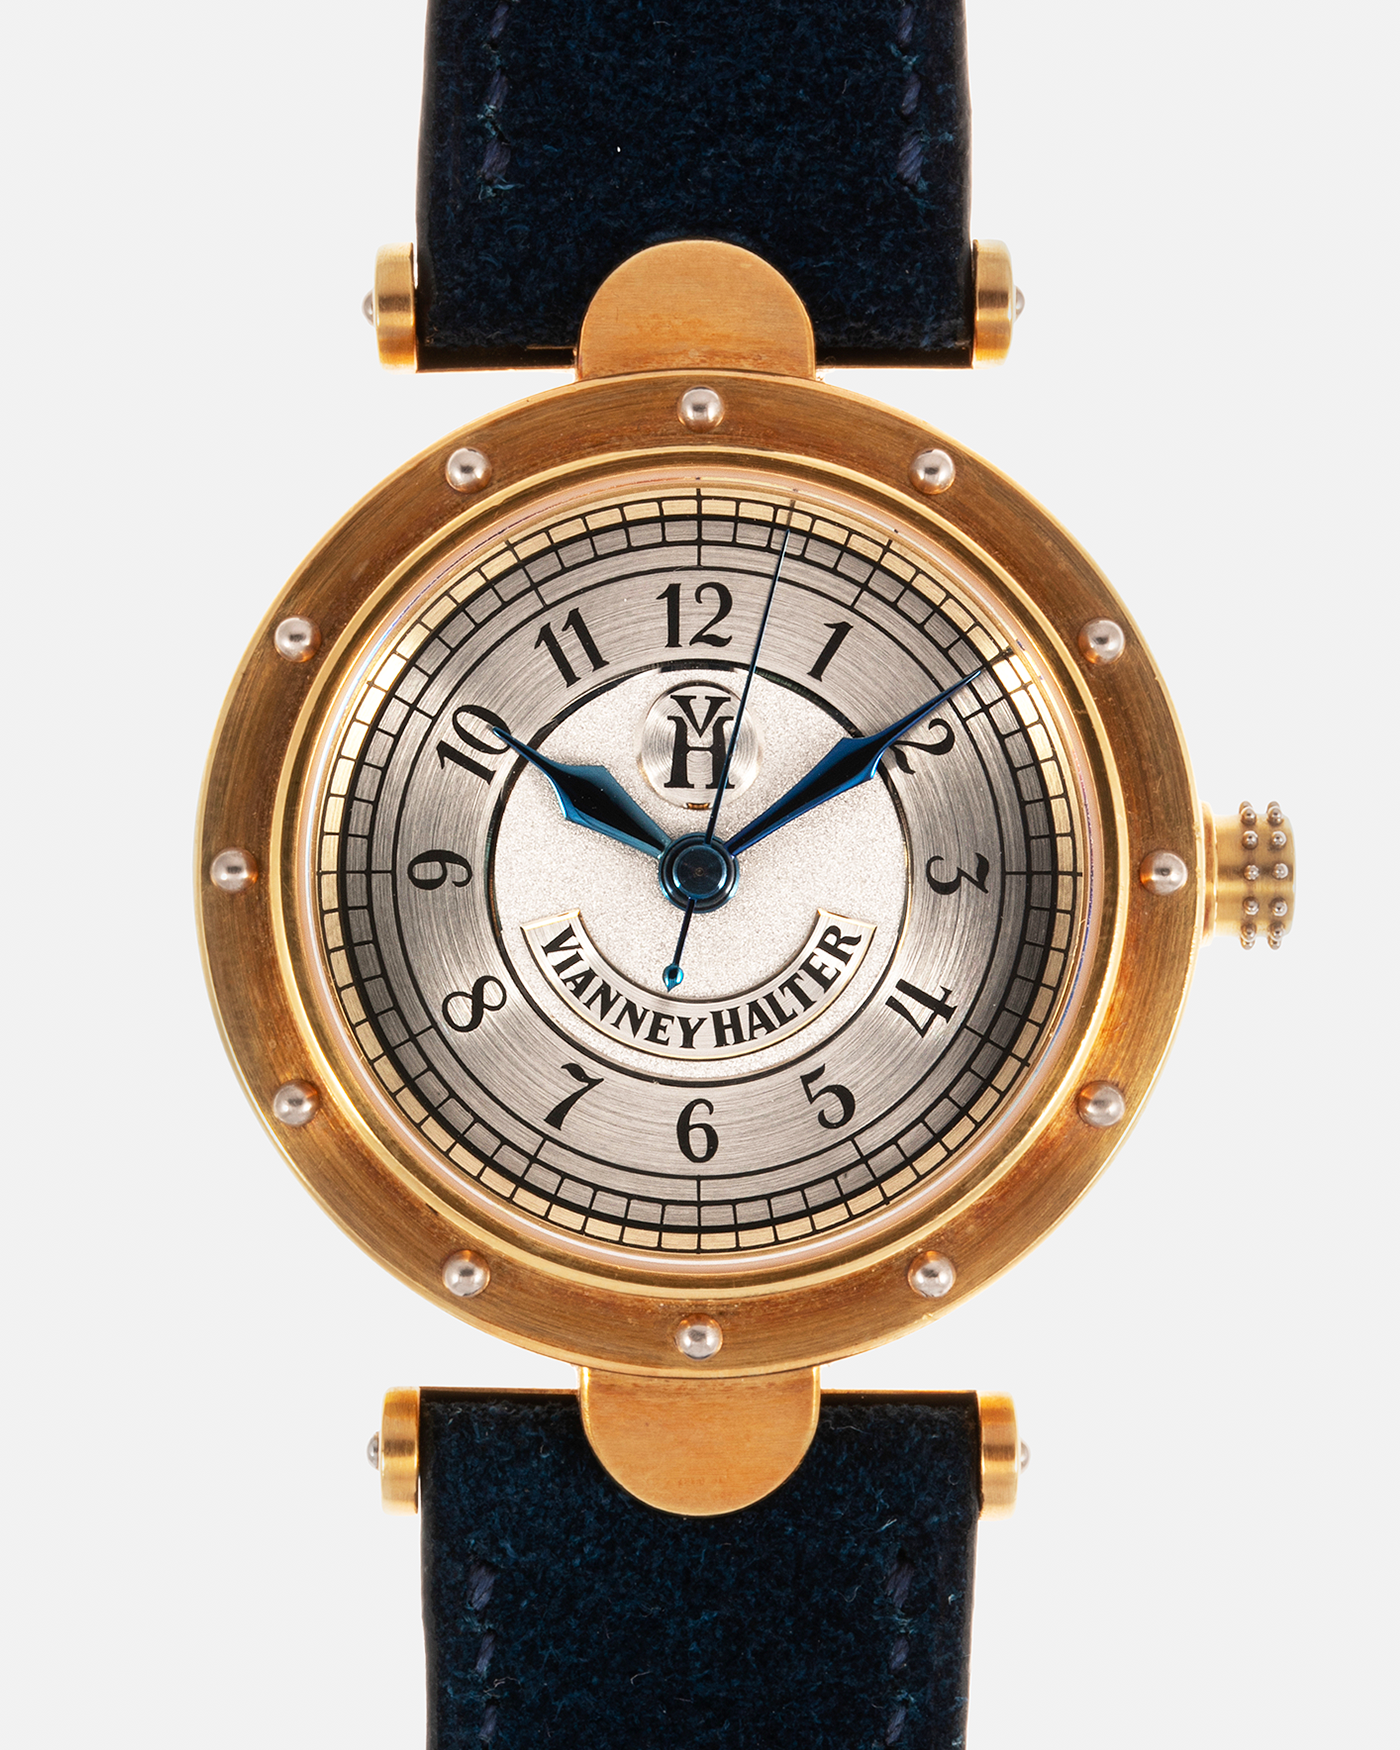 Brand: Vianney Halter Year: 2000’s Model: Classic Material: 18k Yellow Gold Movement: Modified Lemania 8810 with mystery motor Case Diameter: 36mm Bracelet/Strap: Blue Suede strap with Yellow Gold Tang Buckle